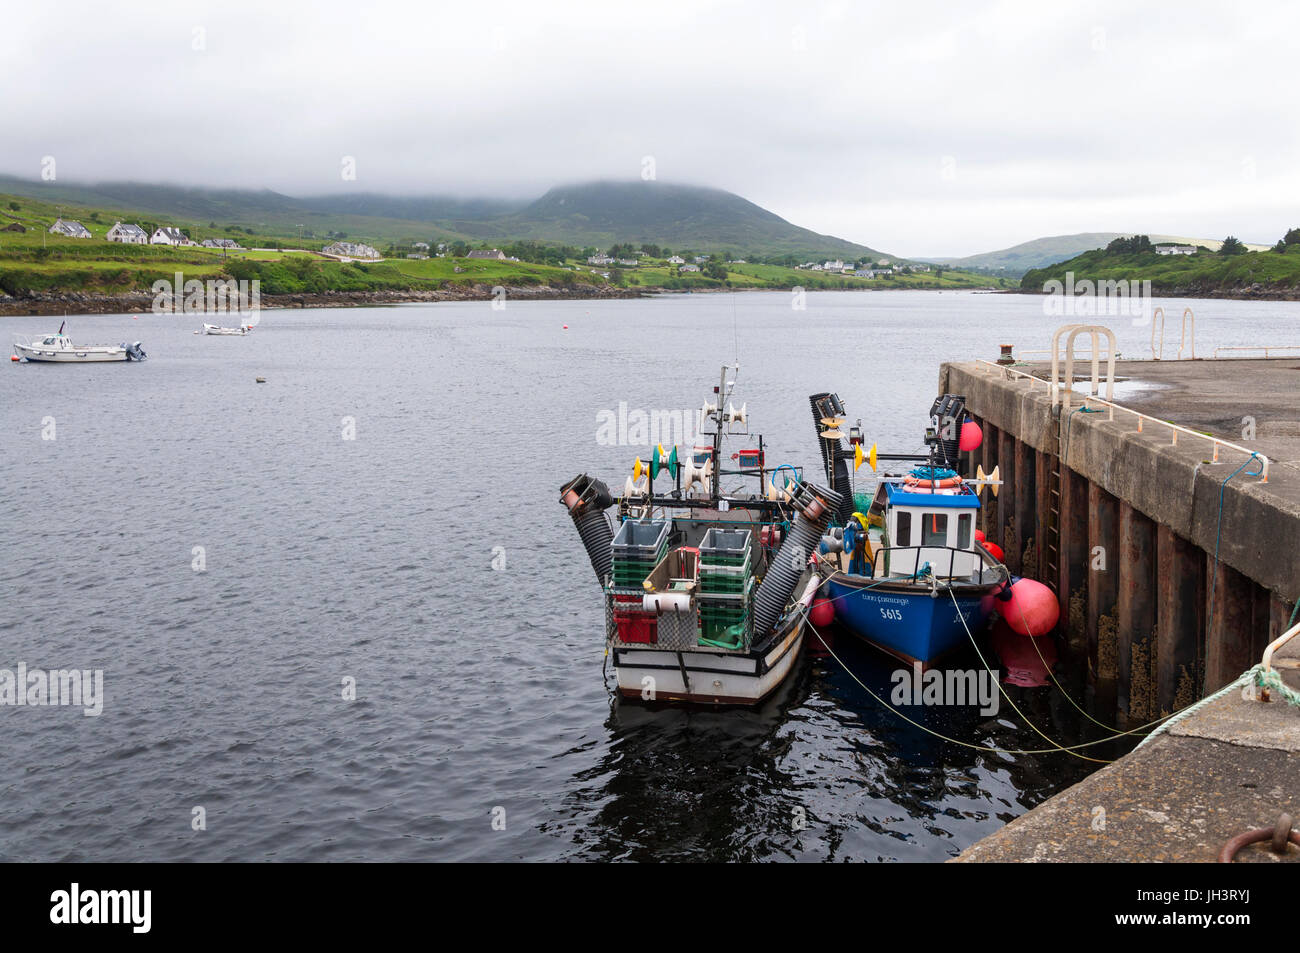 Inshore fishing vessels at Teelin pier harbour, County Donegal, Ireland Stock Photo